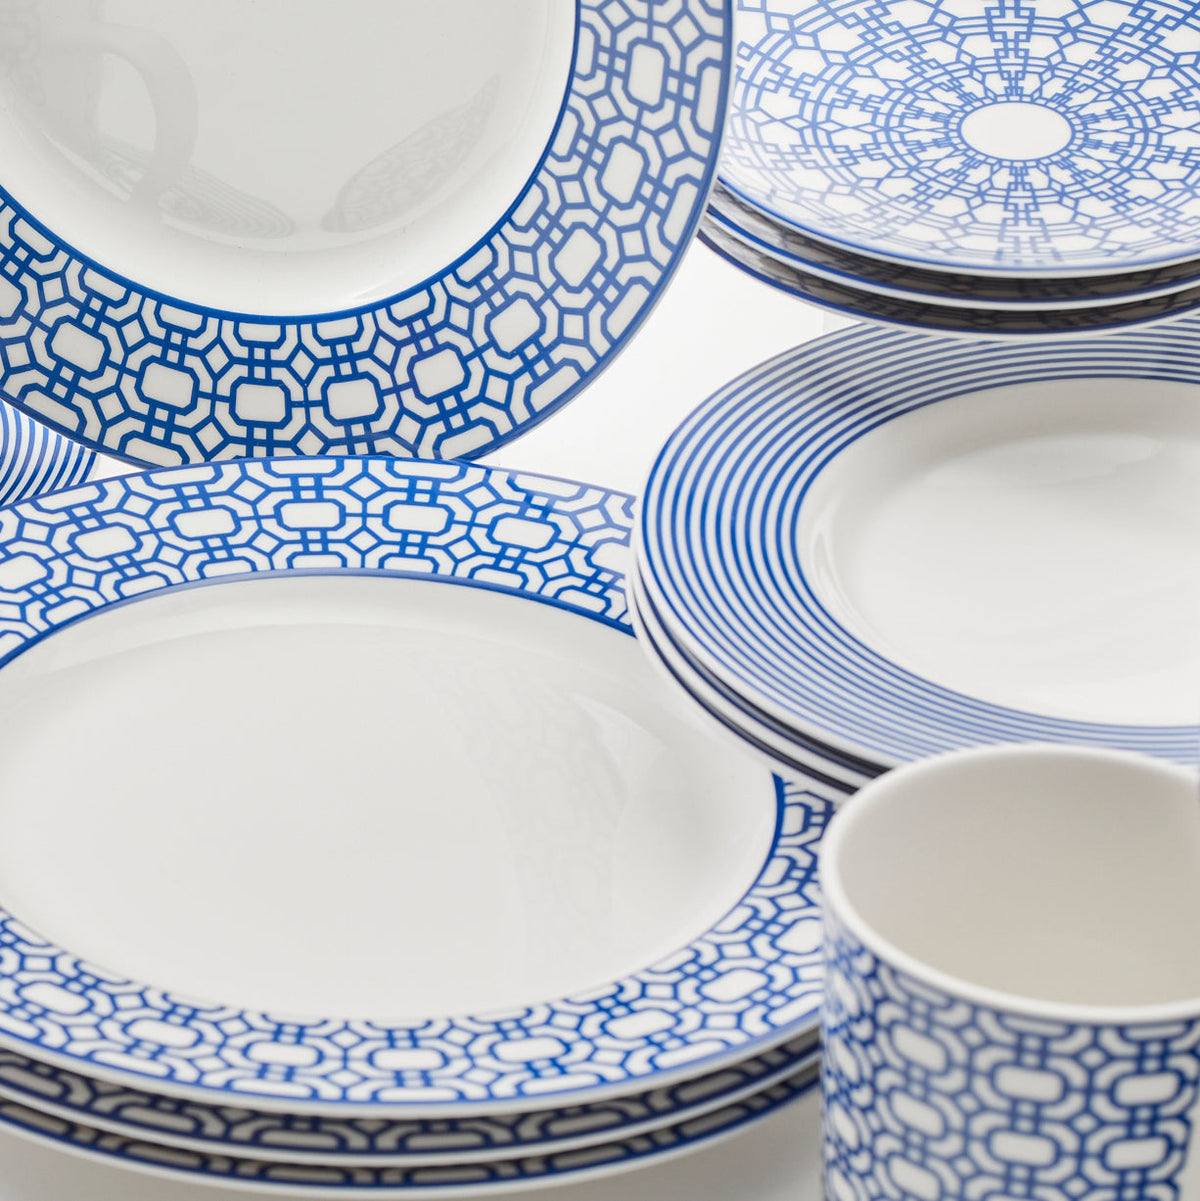 A Caskata Newport Garden Gate Table for 4, perfect for any dinnerware collection. The set of blue and white plates and cups is not only stylish but also practical, as it is microwave and dishwasher safe.